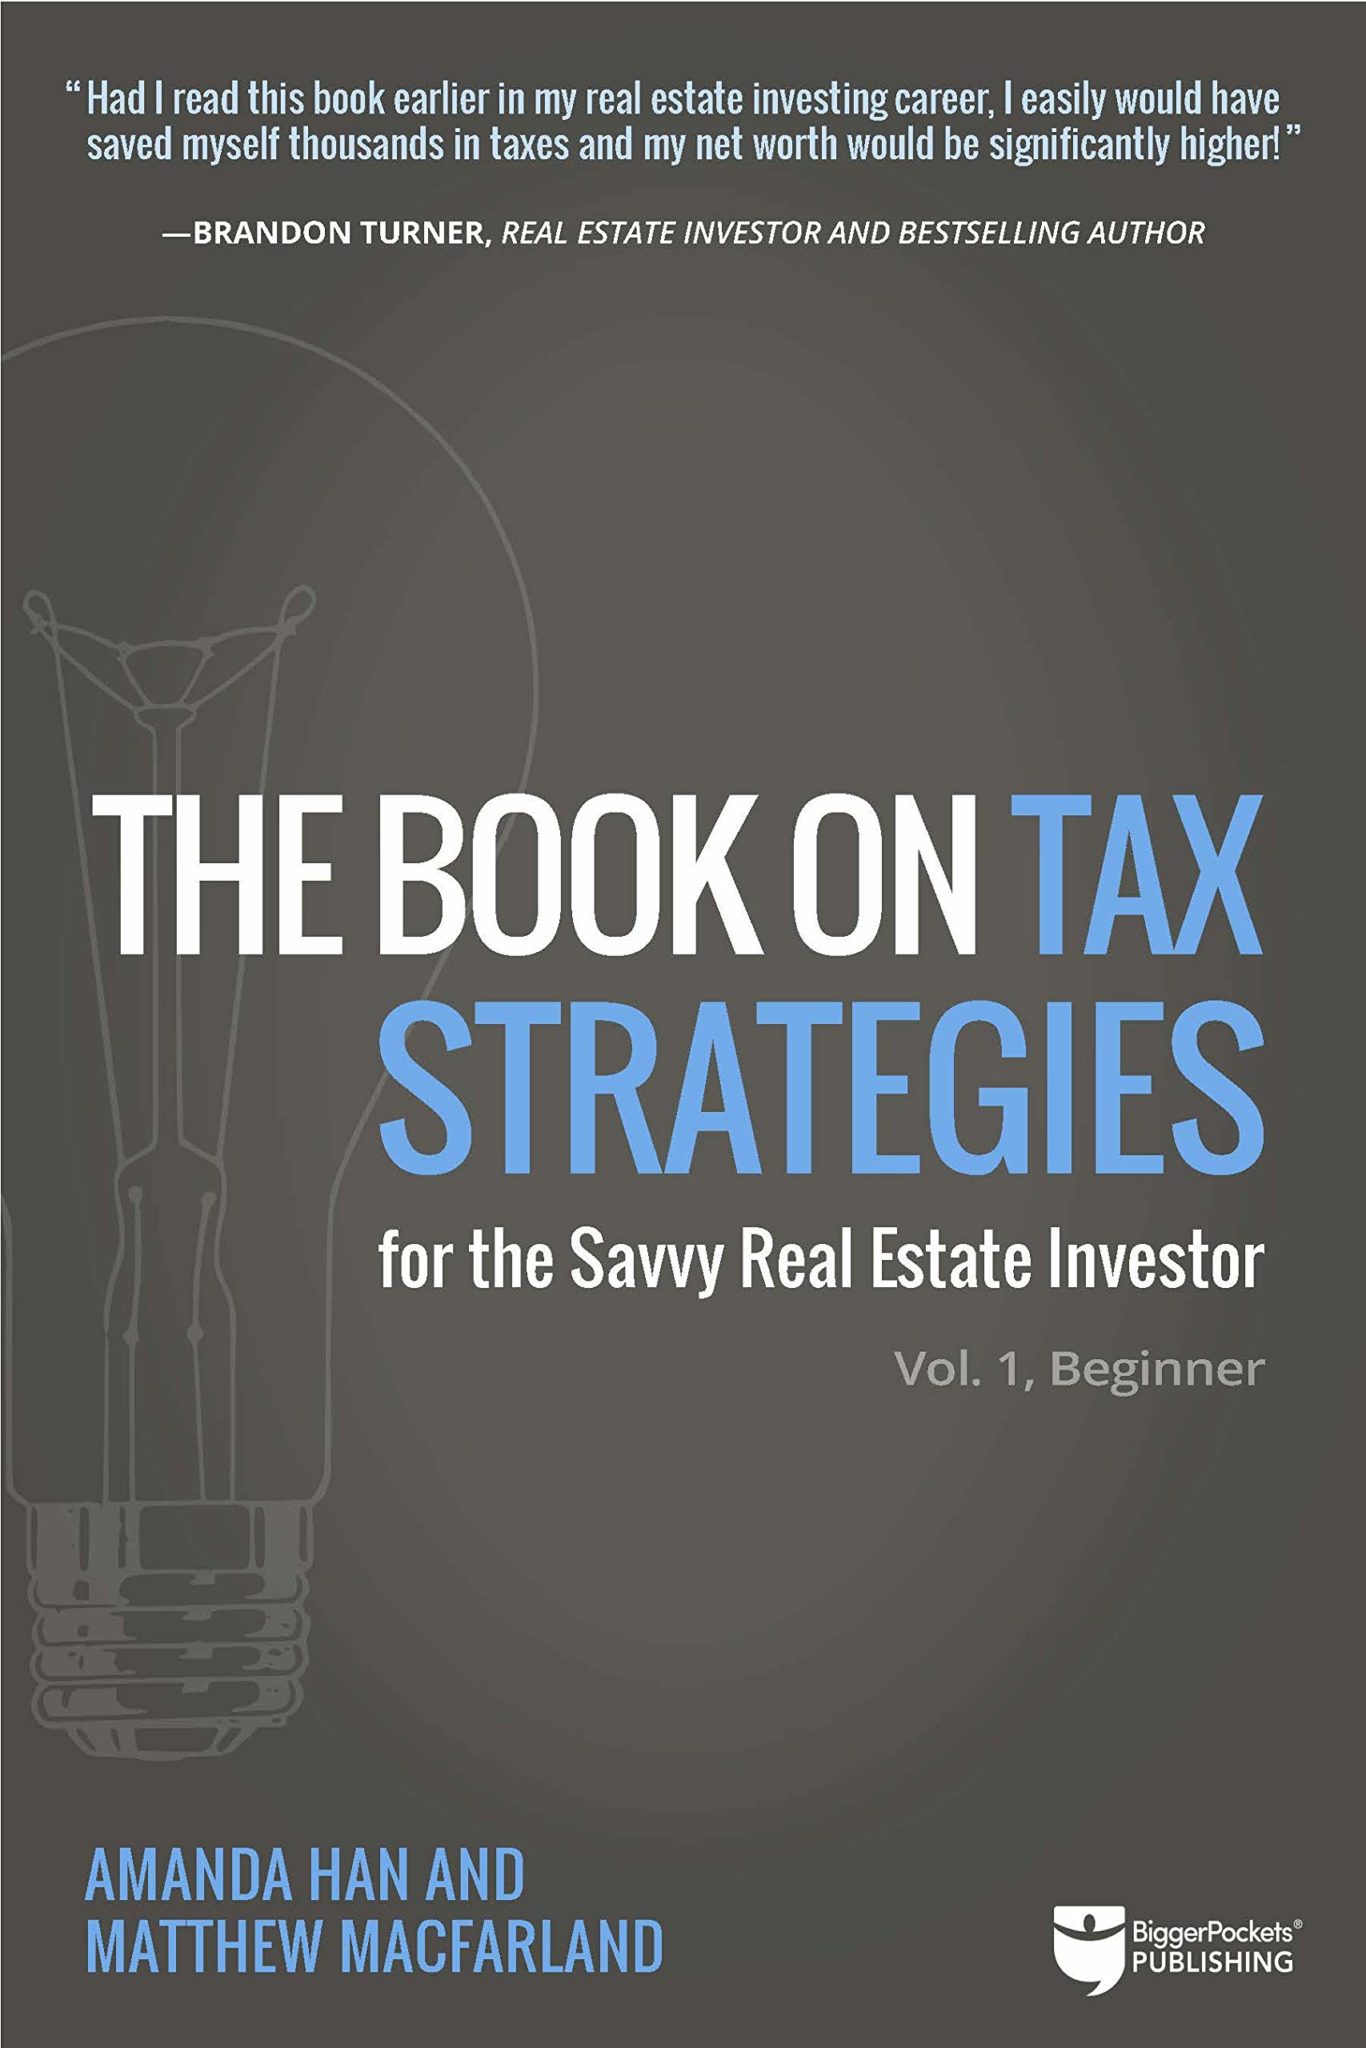 Best Real Estate Book on Tax Strategies for the Savvy Real Estate Investor